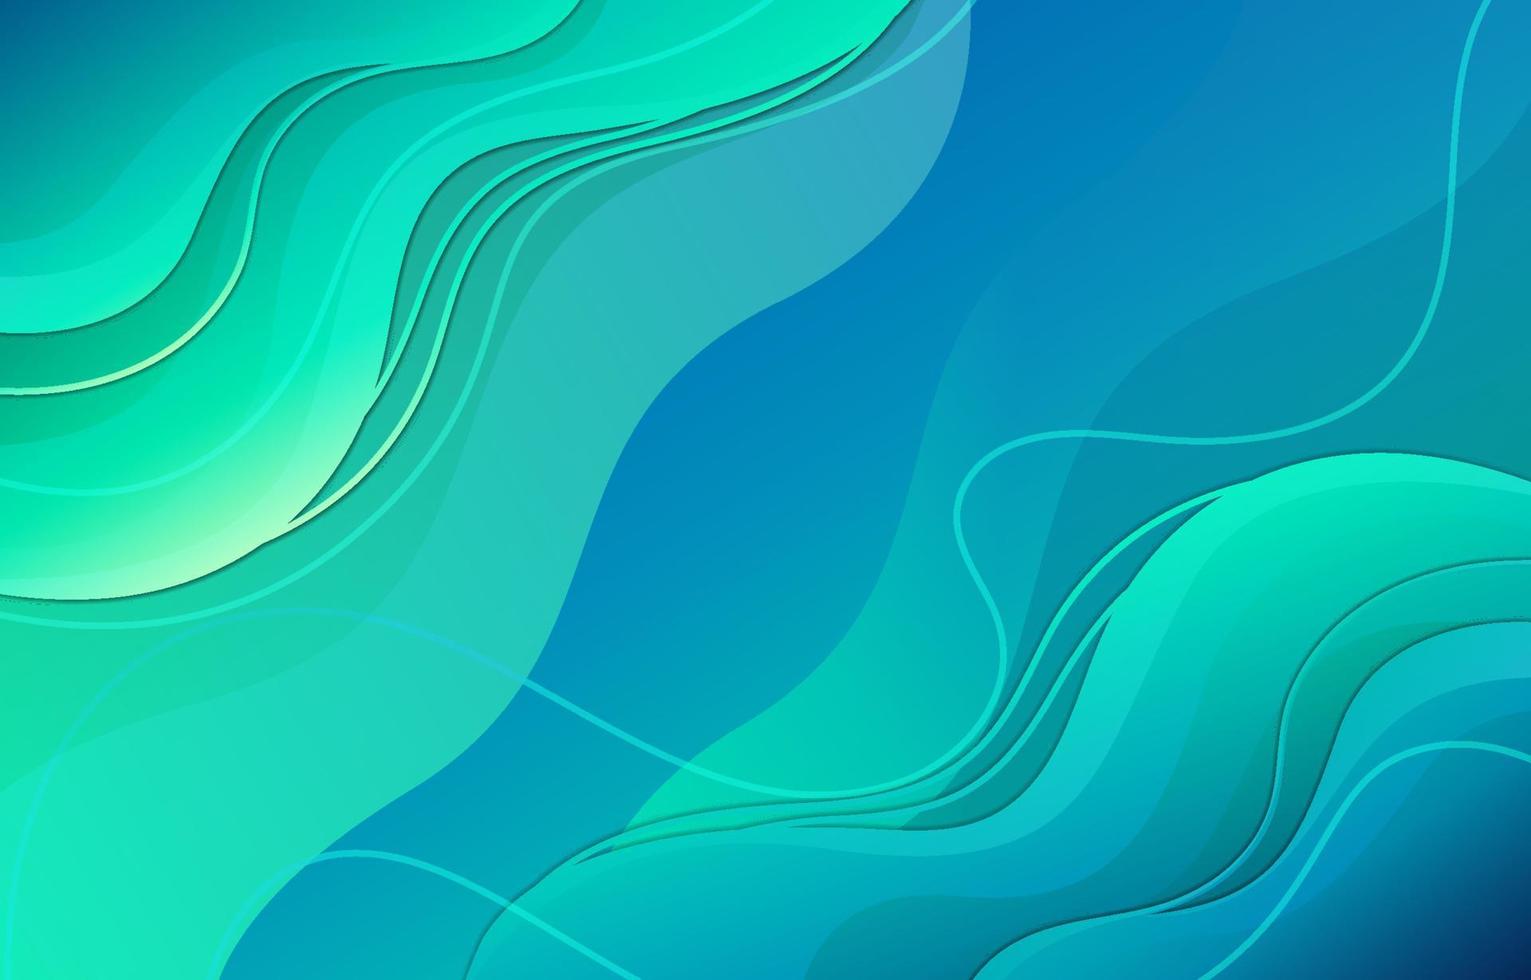 Gradient of Blue and Green Background vector